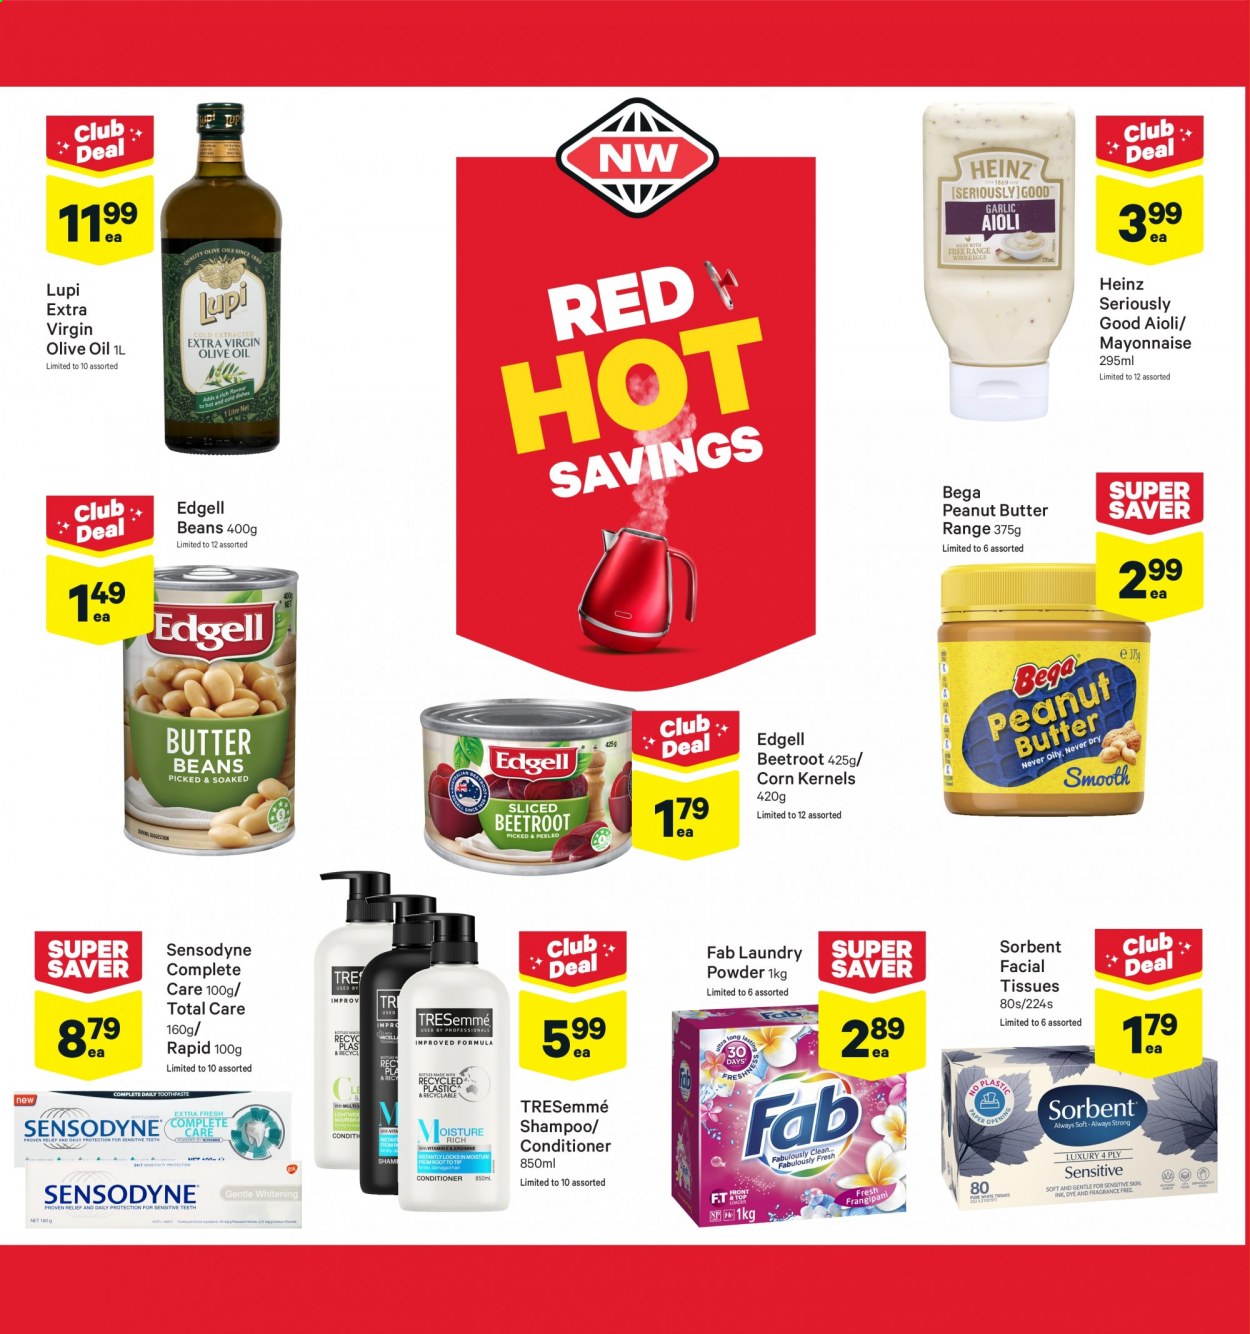 thumbnail - New World mailer - 28.06.2021 - 04.07.2021 - Sales products - beans, corn, garlic, beetroot, eggs, mayonnaise, Heinz, extra virgin olive oil, olive oil, oil, peanut butter, tissues, shampoo, toothpaste, Sensodyne, facial tissues, conditioner, TRESemmé. Page 4.